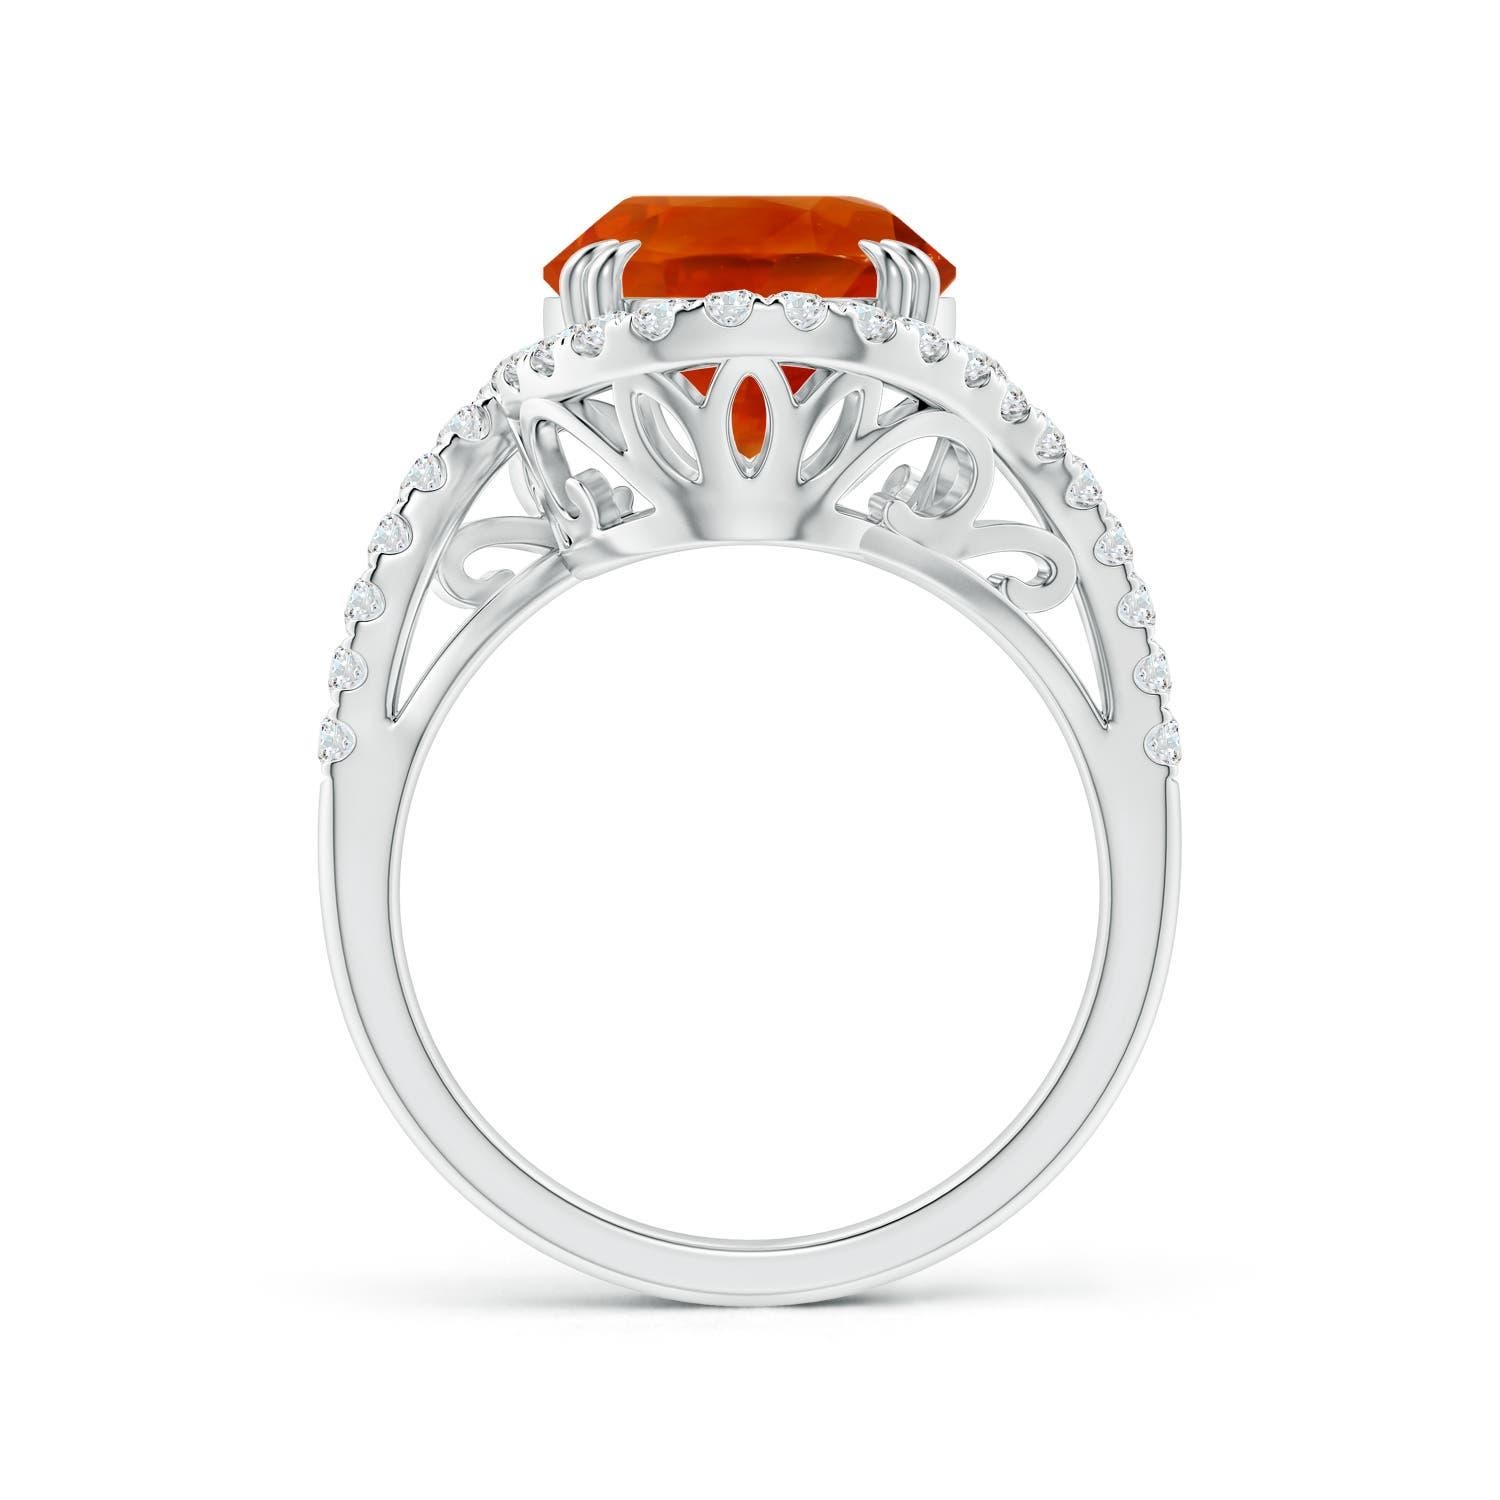 For Sale:  Angara GIA Certified Natural Orange Sapphire Ring in White Gold with Diamonds 2